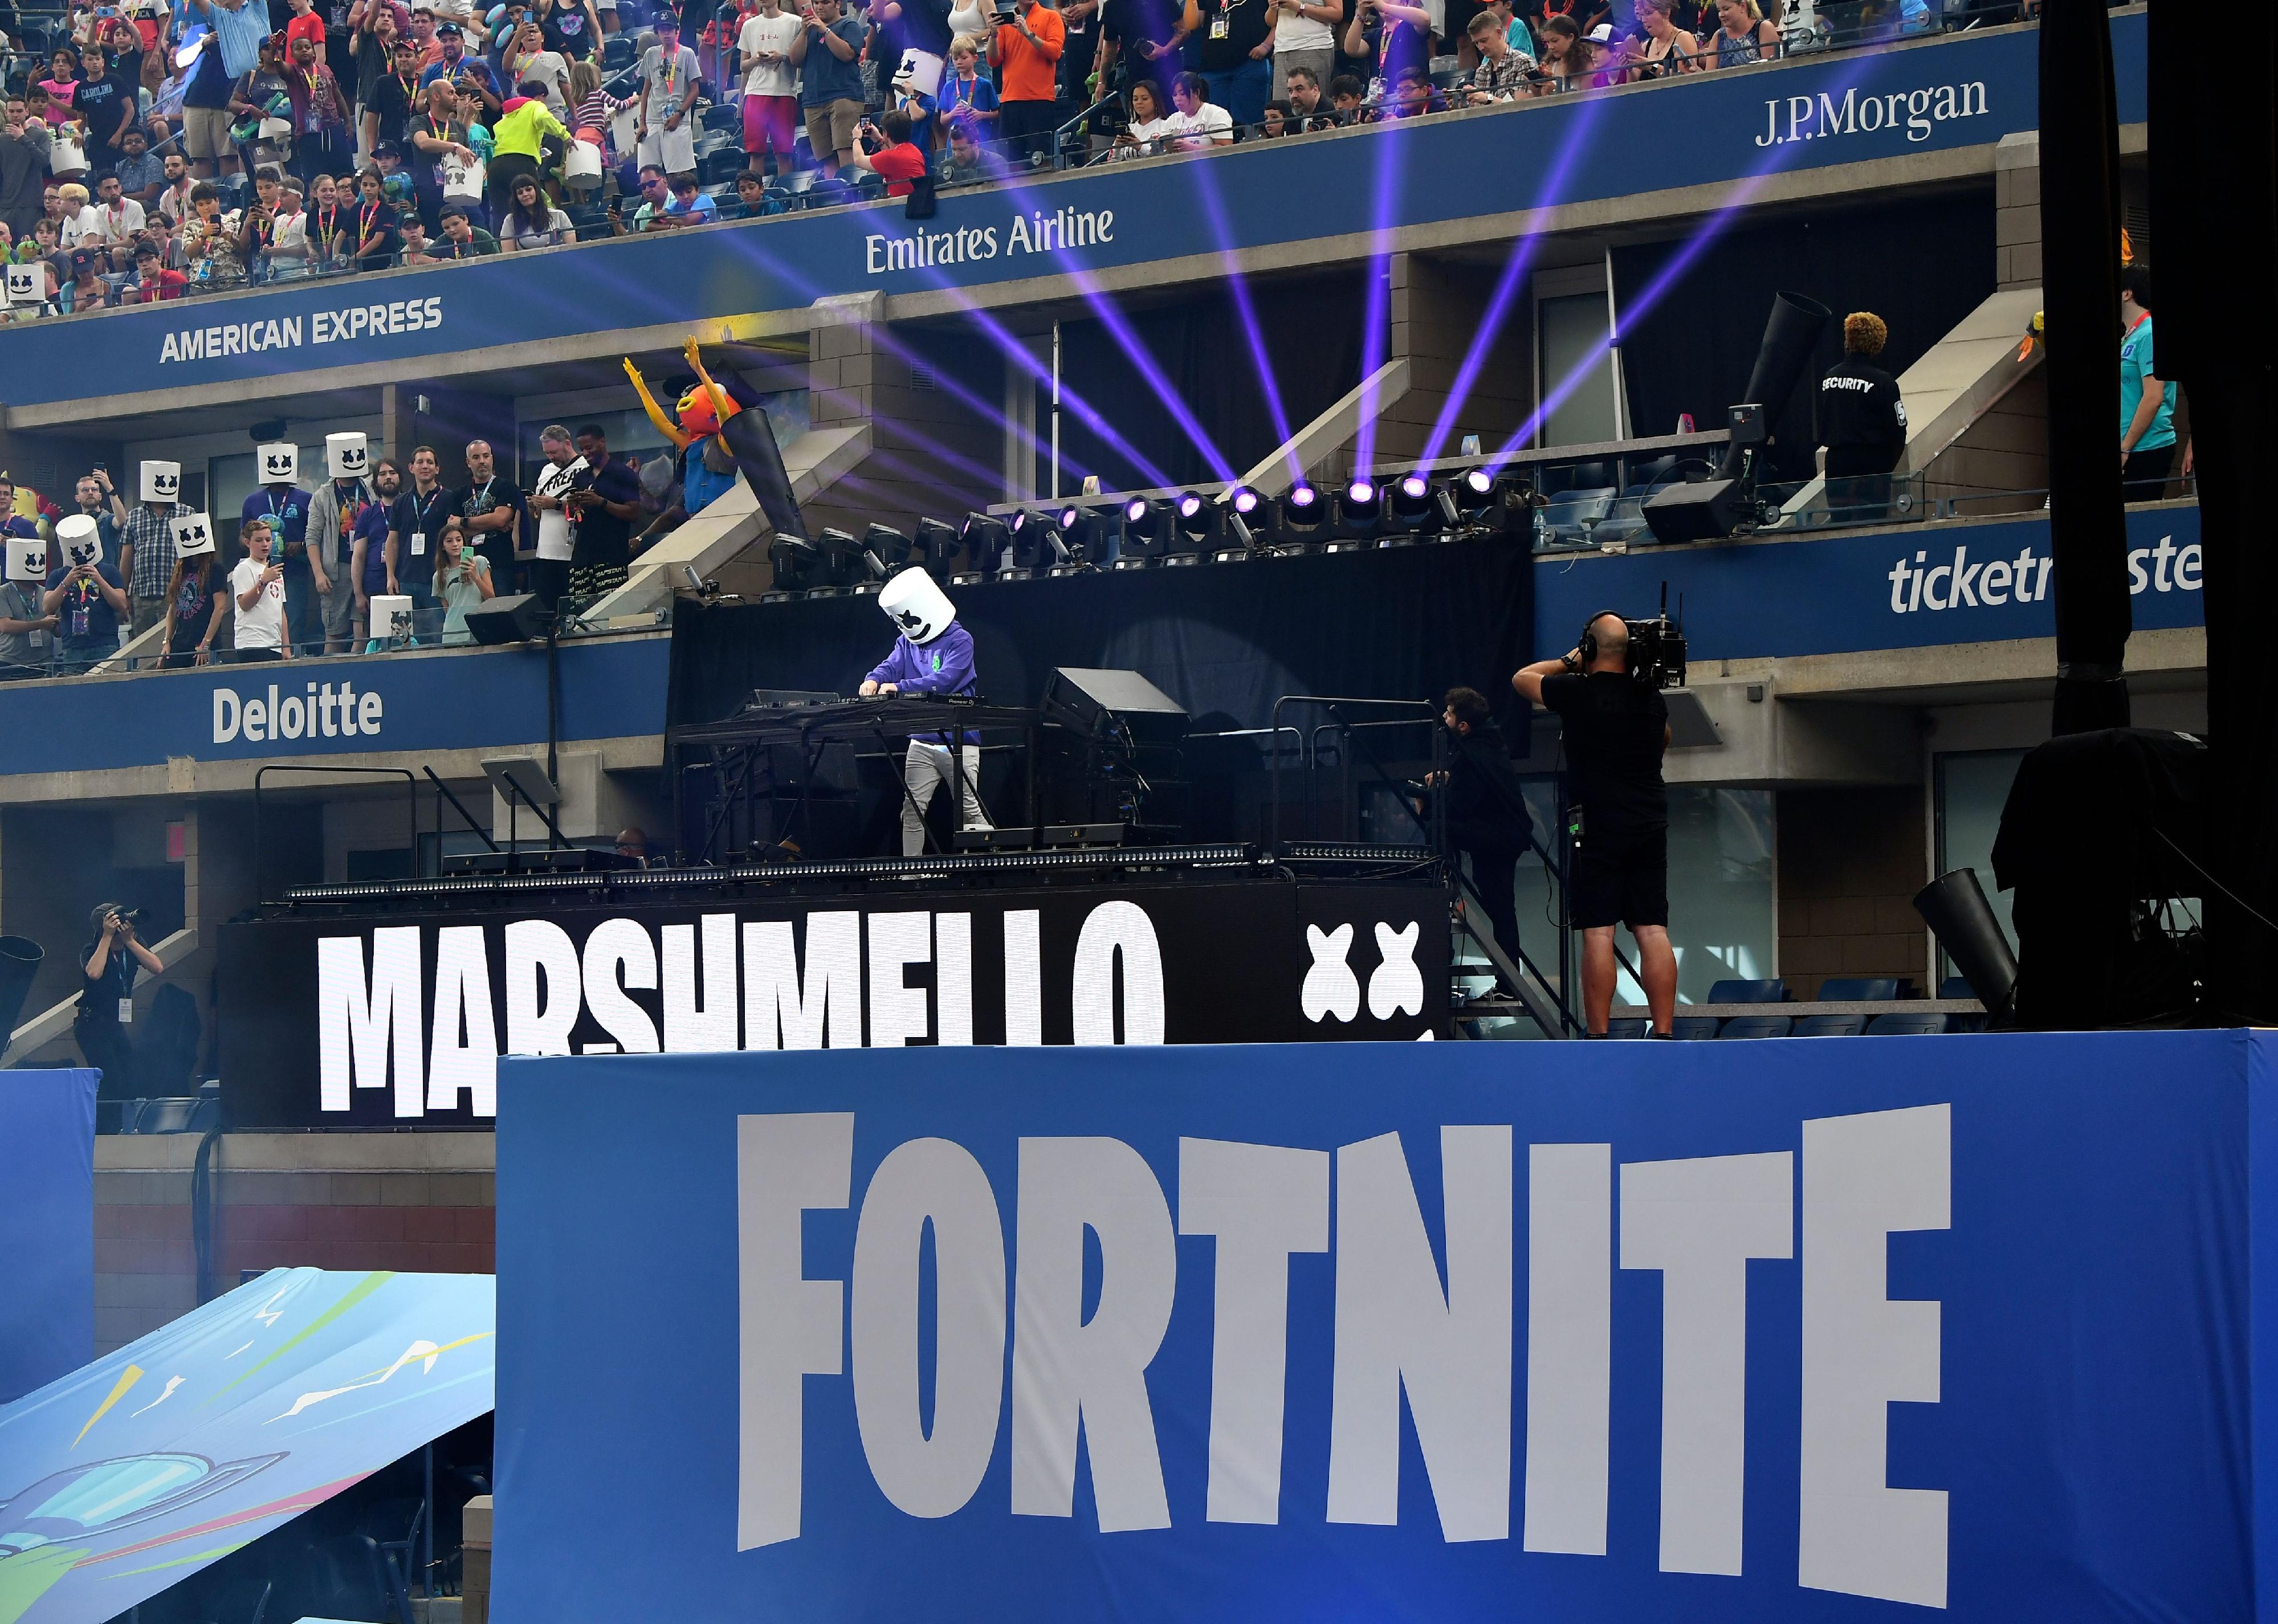 Dj Marshmello performs ahed of the final of the Solo competition at the 2019 Fortnite World Cup.